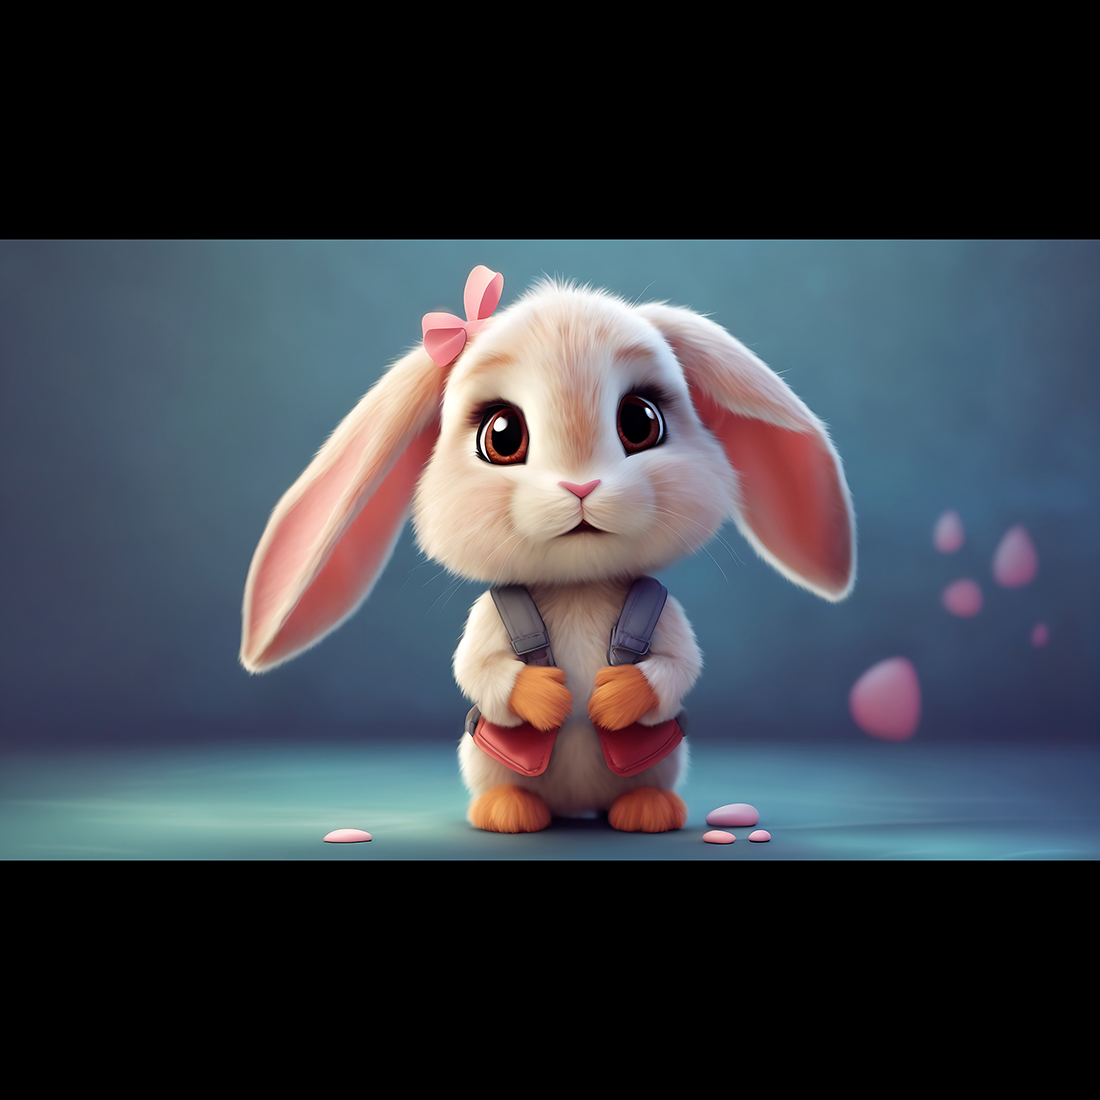 Cute Pixar style pink baby rabbit standing on a abstruct background - ai generated cover image.